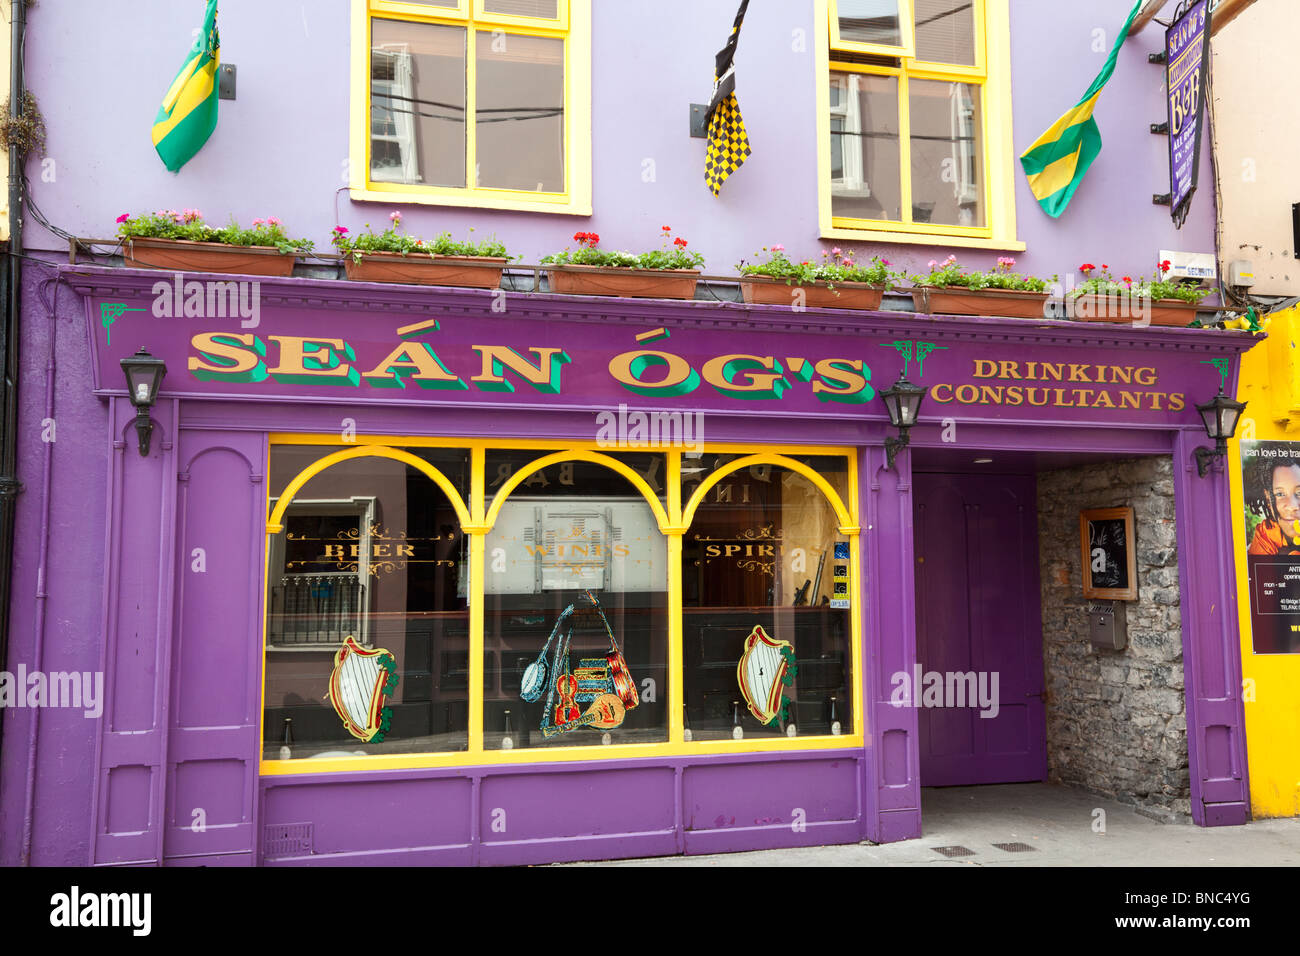 Sean Og's bar ('Drinking Consultants') at Tralee, Co. Kerry, Ireland Stock Photo